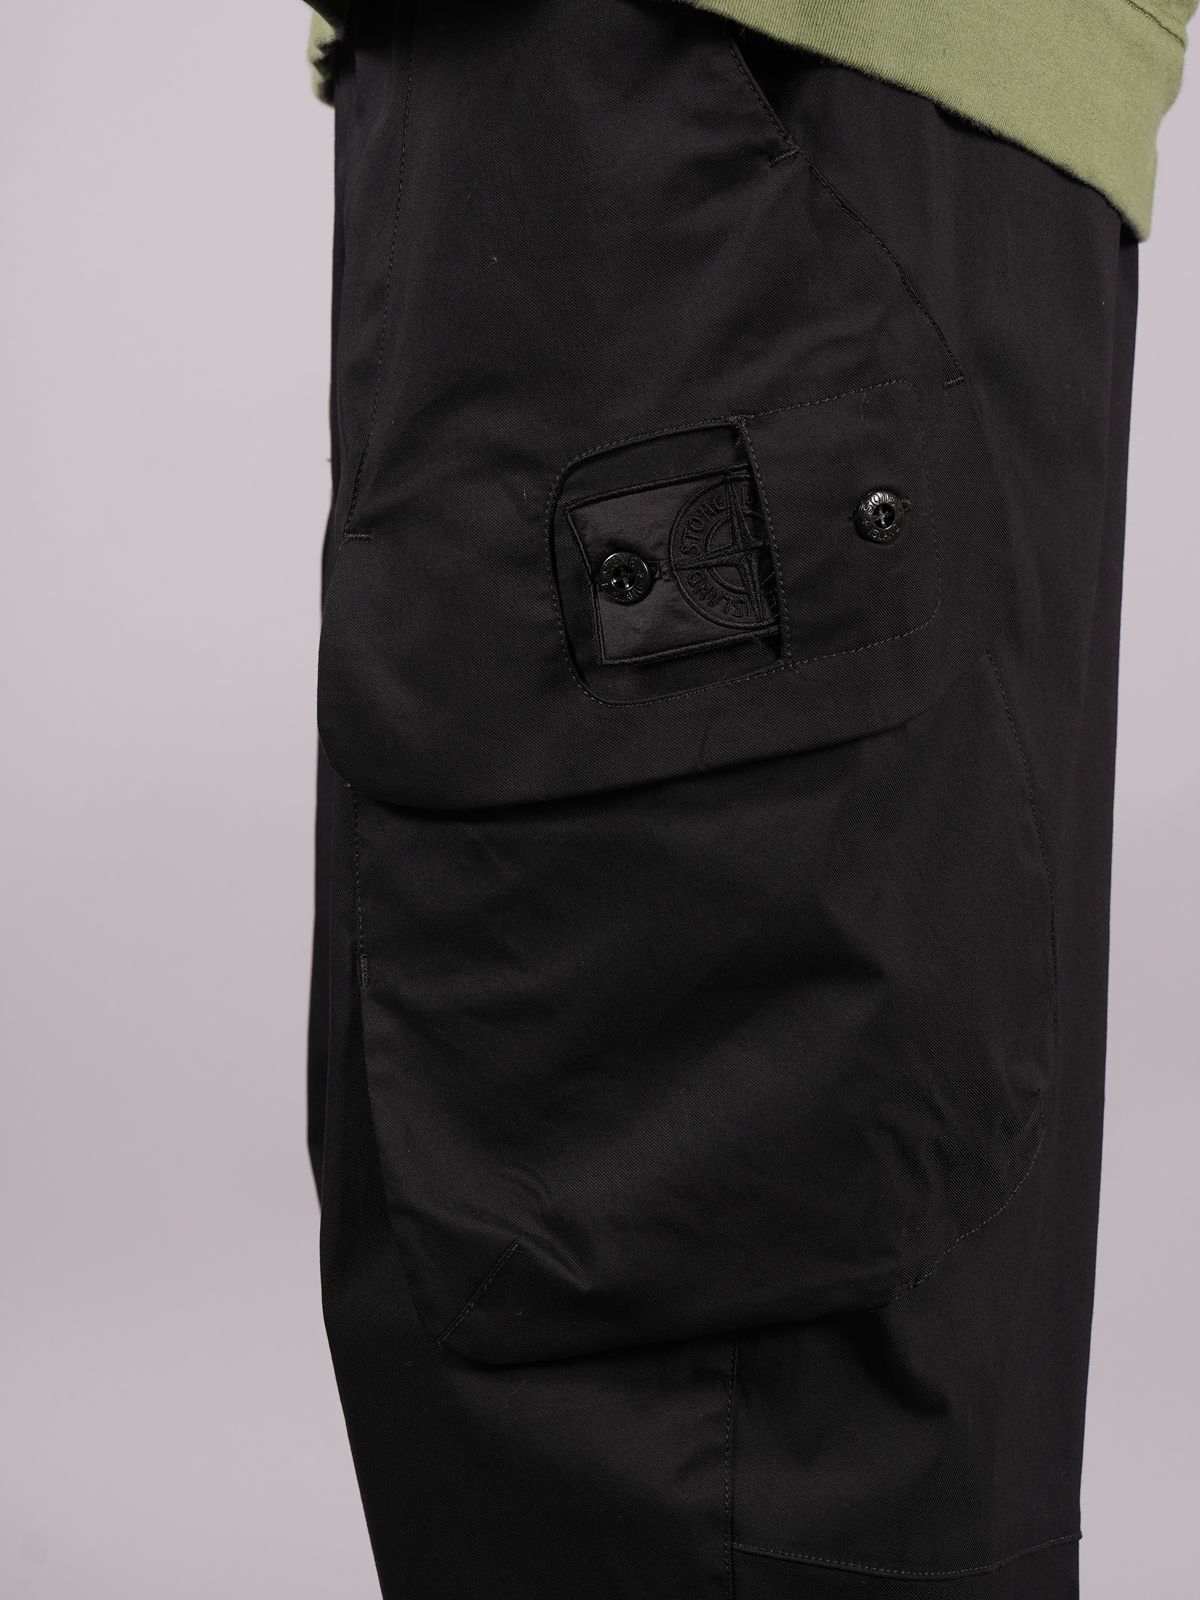 STONE ISLAND SHADOW PROJECT - 30417 CARGO PANTS_CHAPTER 1 / カーゴ